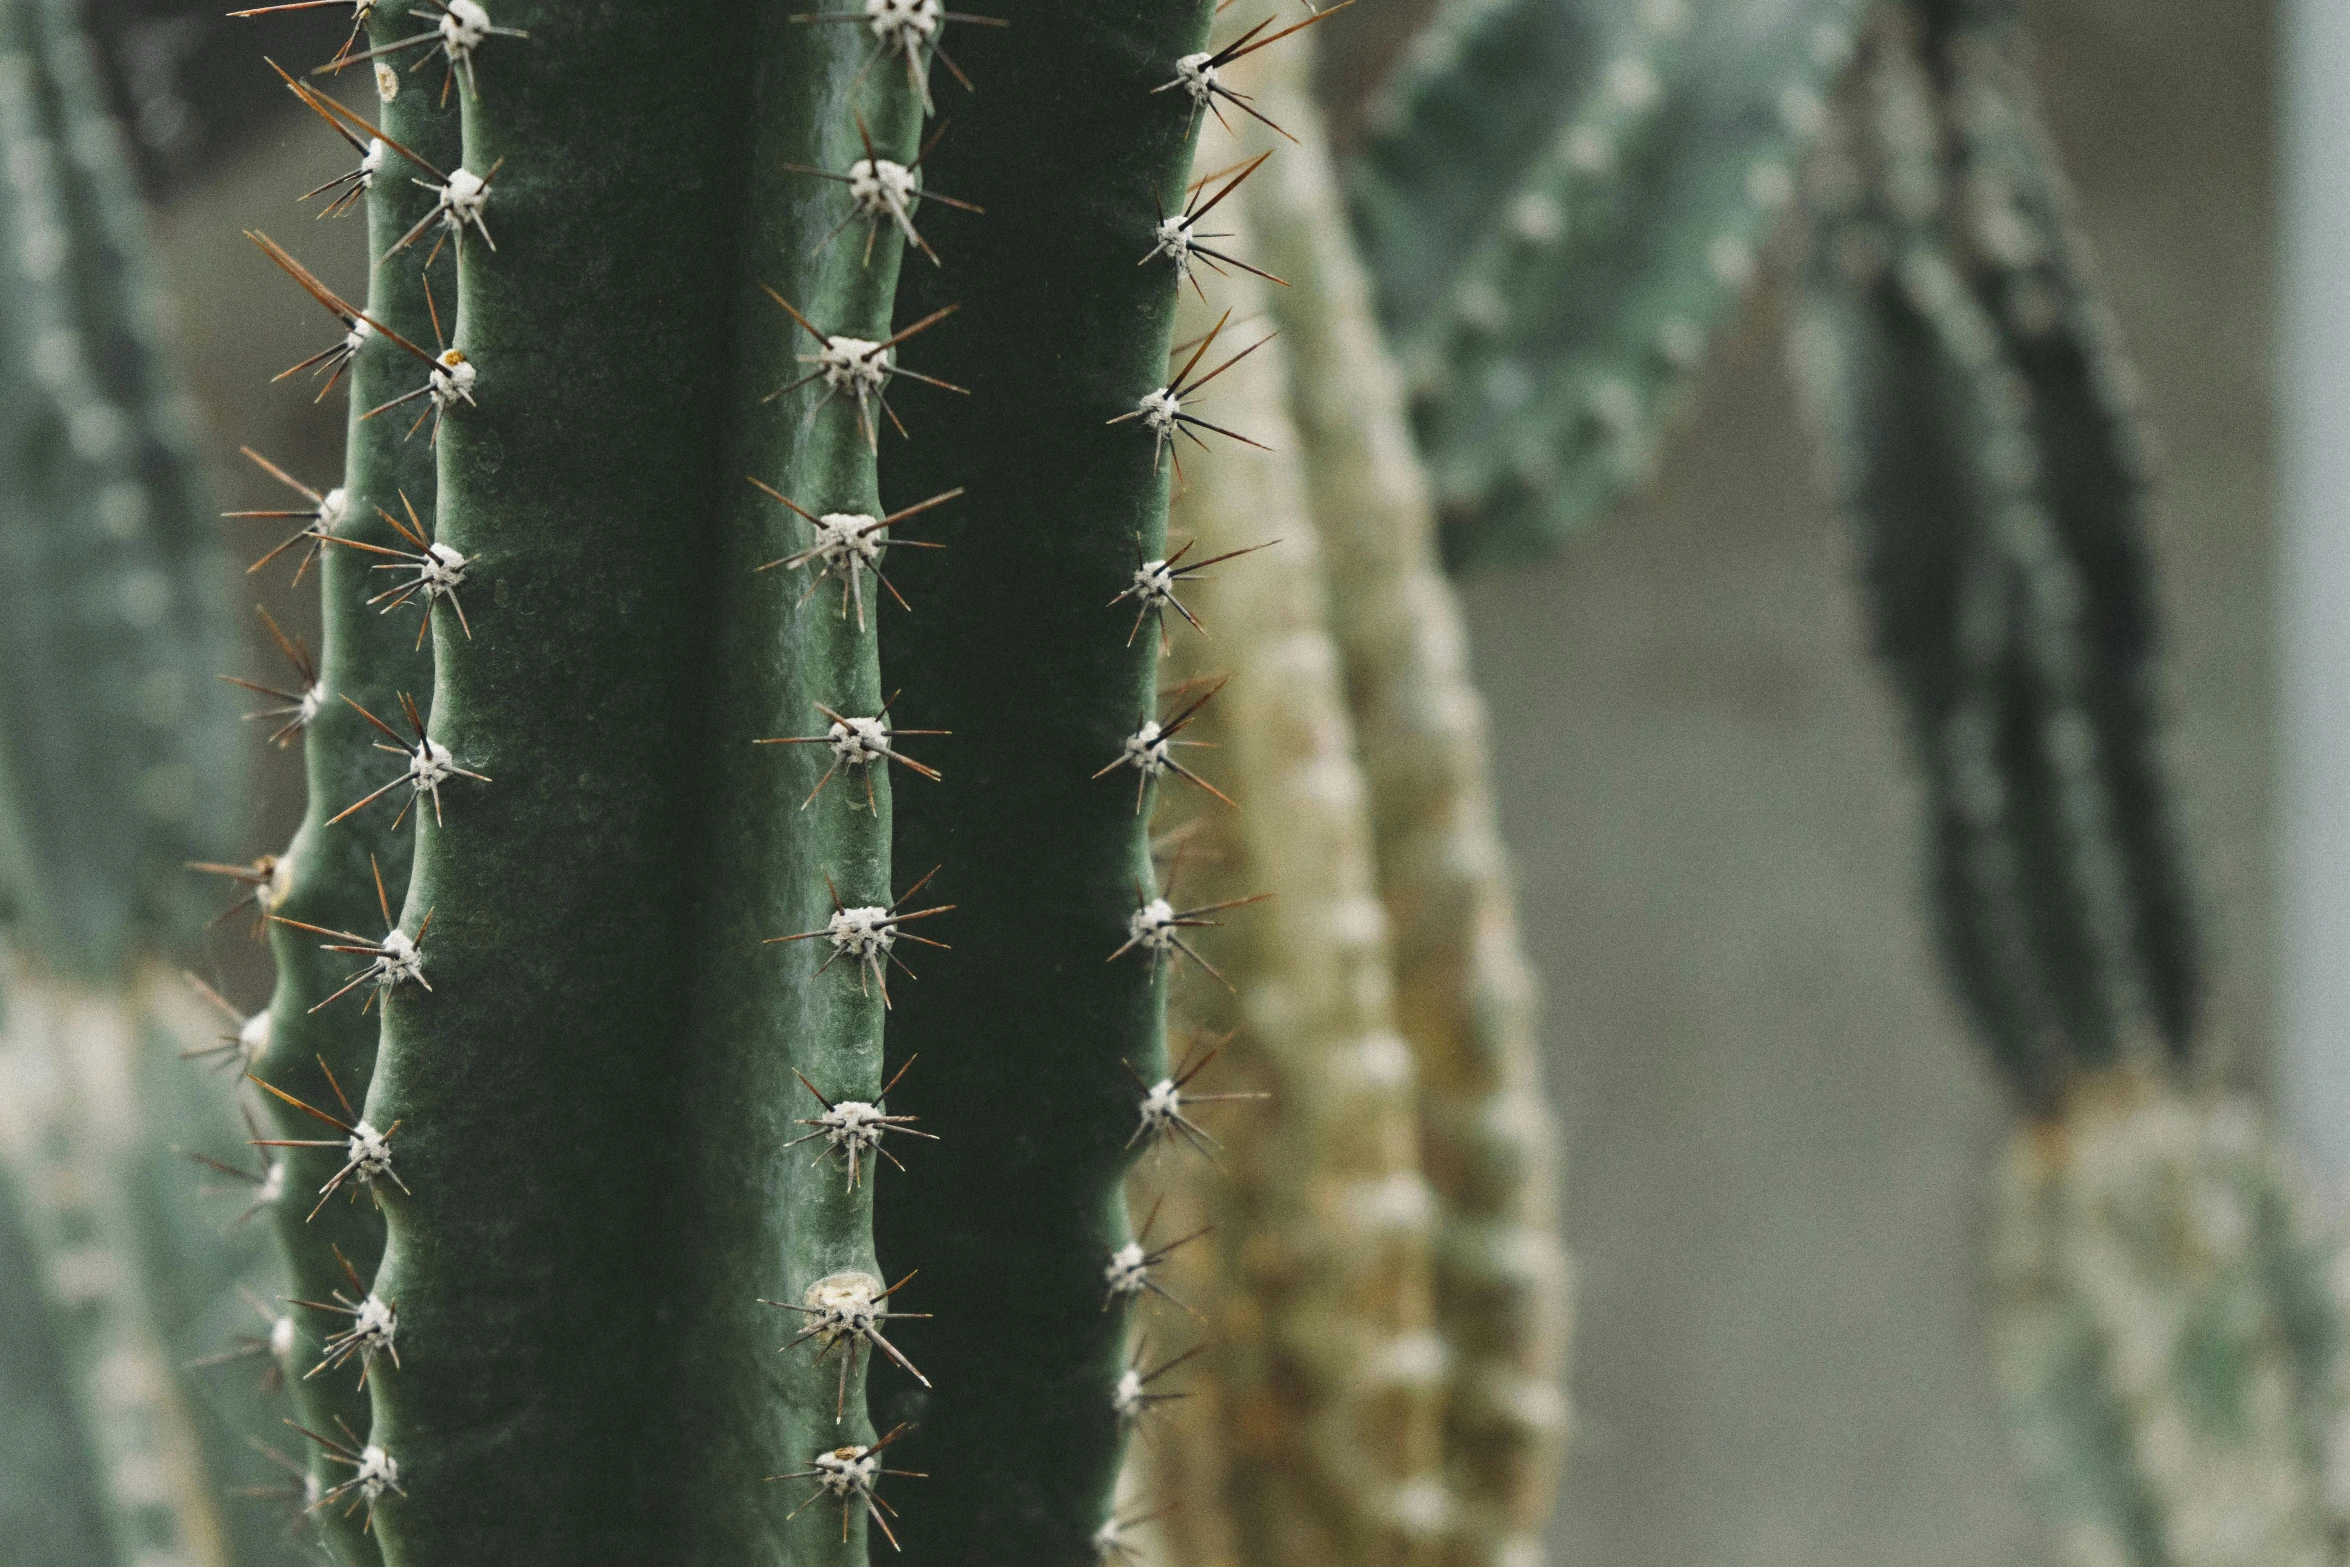 a green cactus standing in front of an image of another cactus